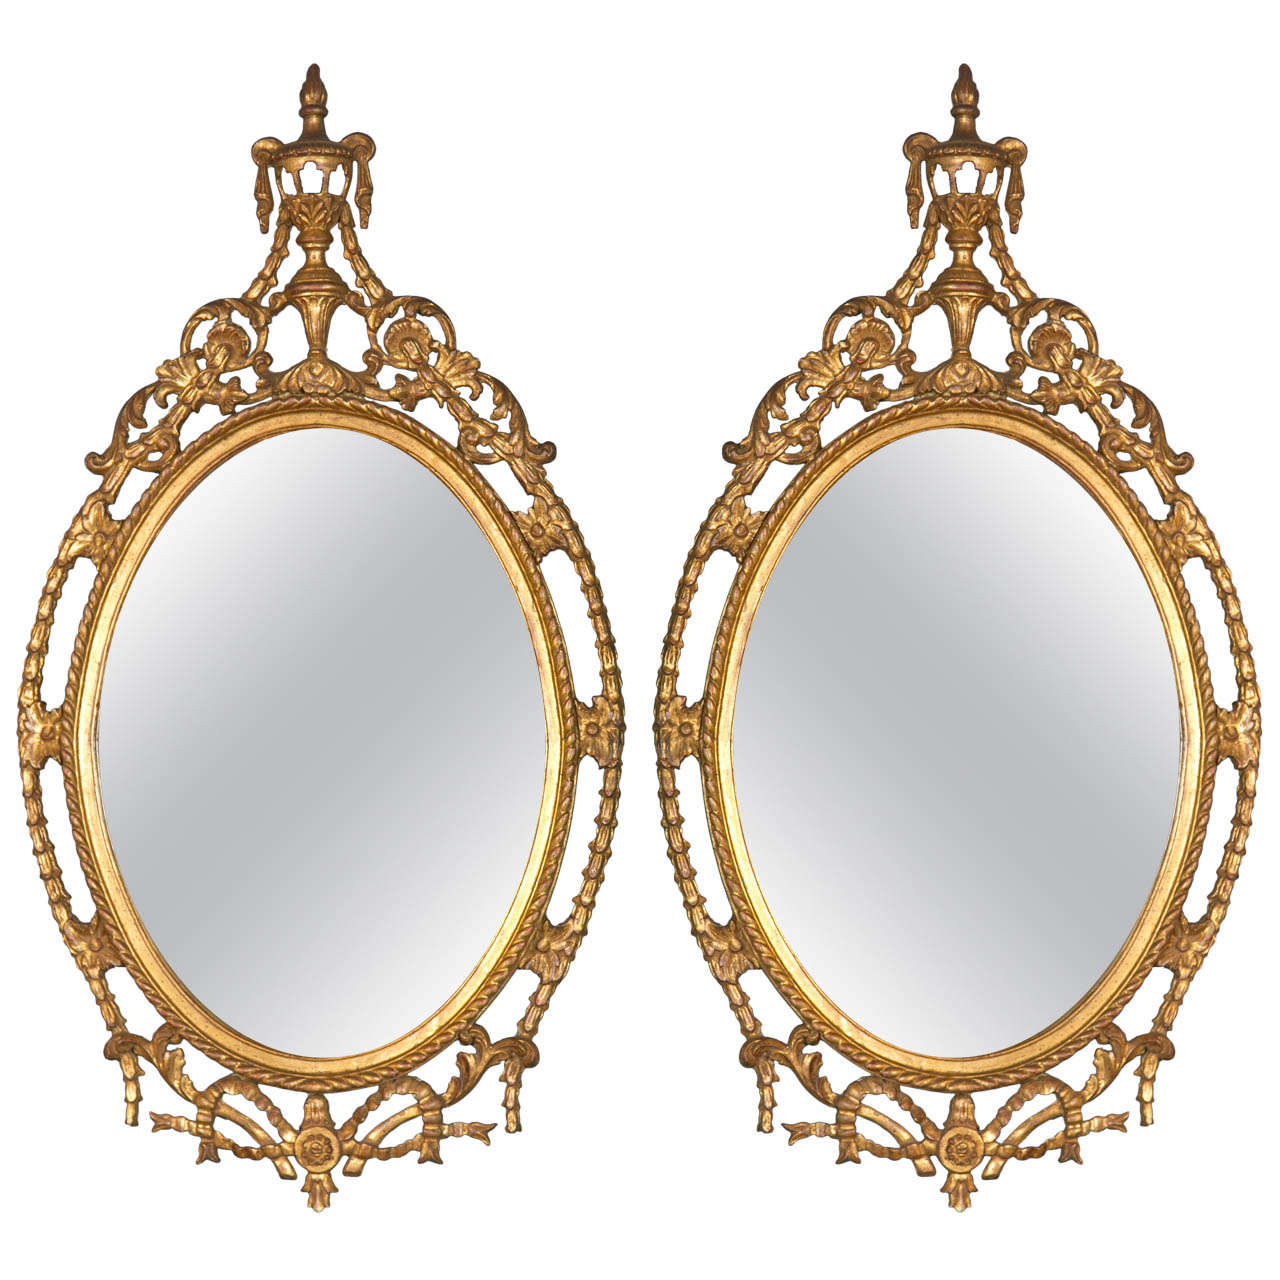 Pair of French Louis XIV Style Oval Mirrors at 1stdibs